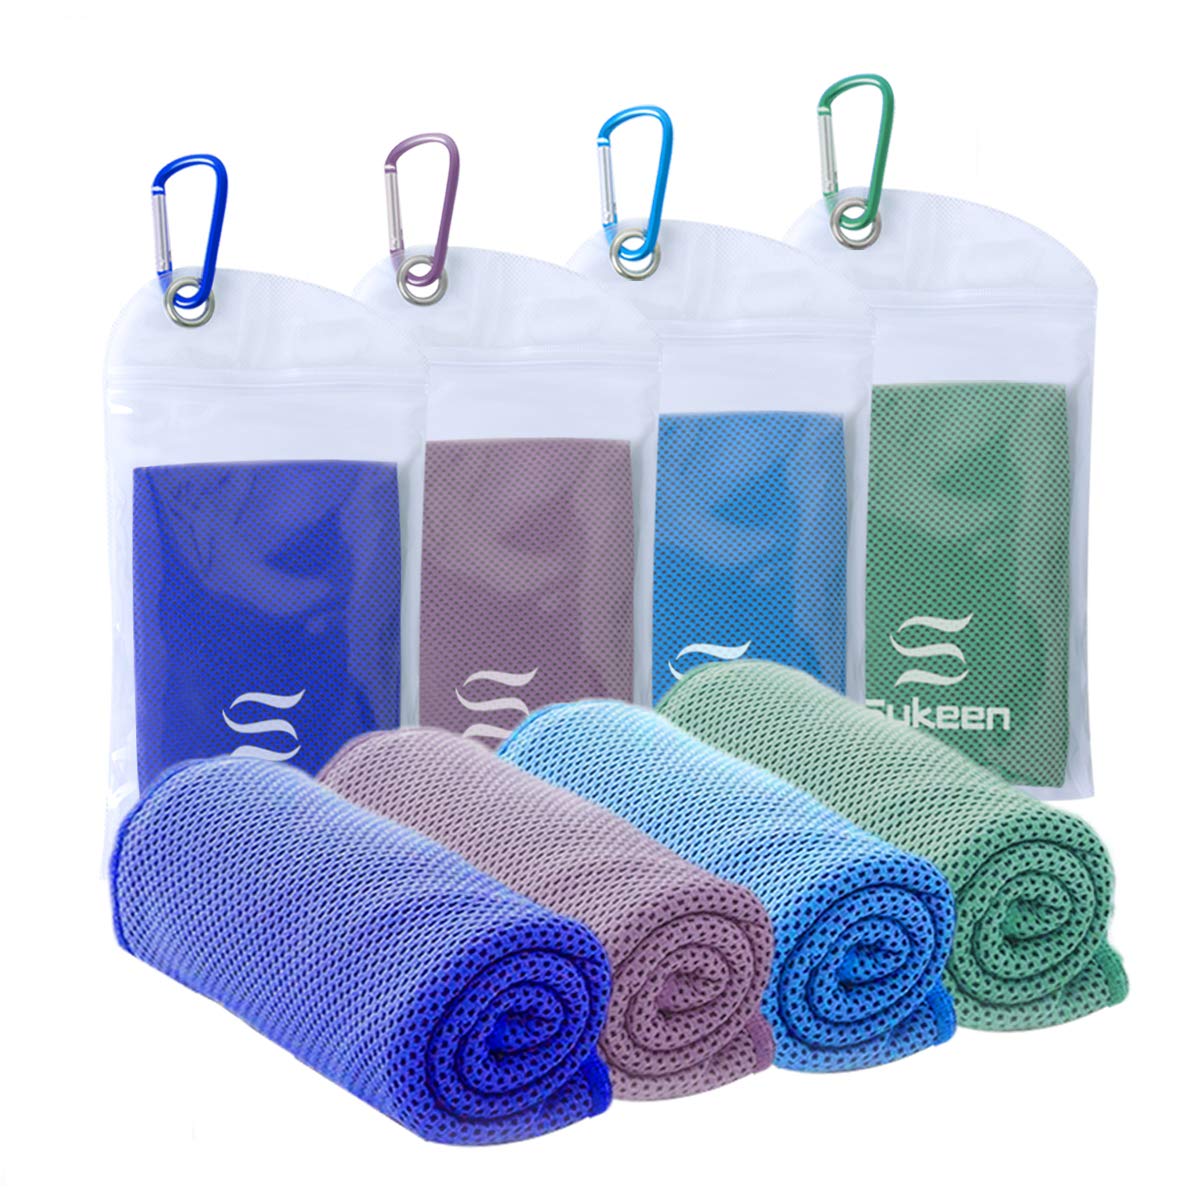 Sukeen Cooling Towel(40x12) Microfiber Cool Towel,Soft Breathable Chilly  Towel for Yoga, Golf, Gym, Camping, Running, Workout & More Activities Dark  Blue/Light Purple/Light Blue/Palegreen